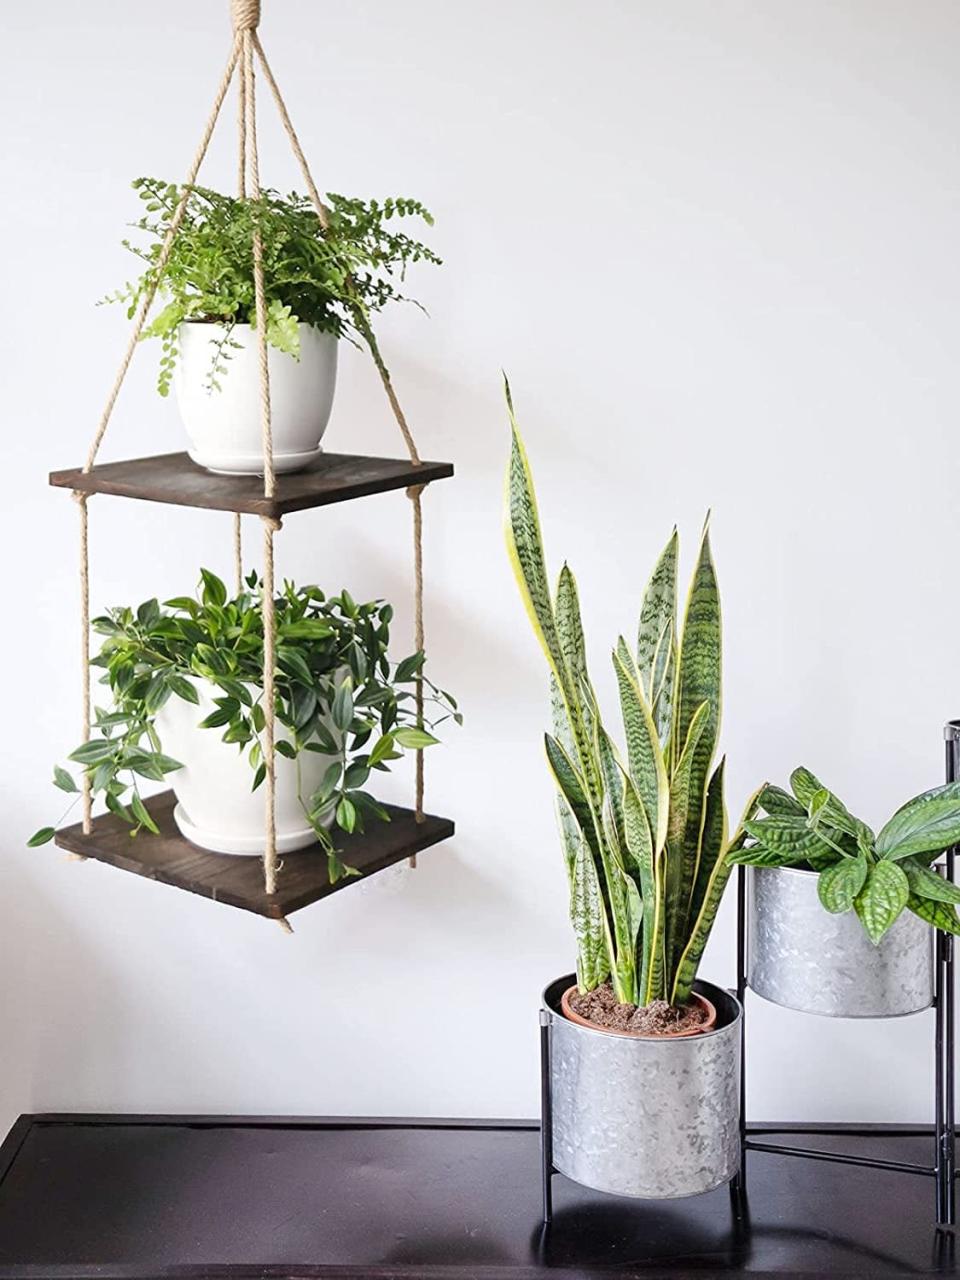 <p>If you have a lot of plants, the <span>Abetree 2-Tier Hanging Plant Shelf </span> ($16) might come in handy. It's perfect for holding bigger pots or curating an arrangement with smaller planters. It's great for a contemporary home. </p>